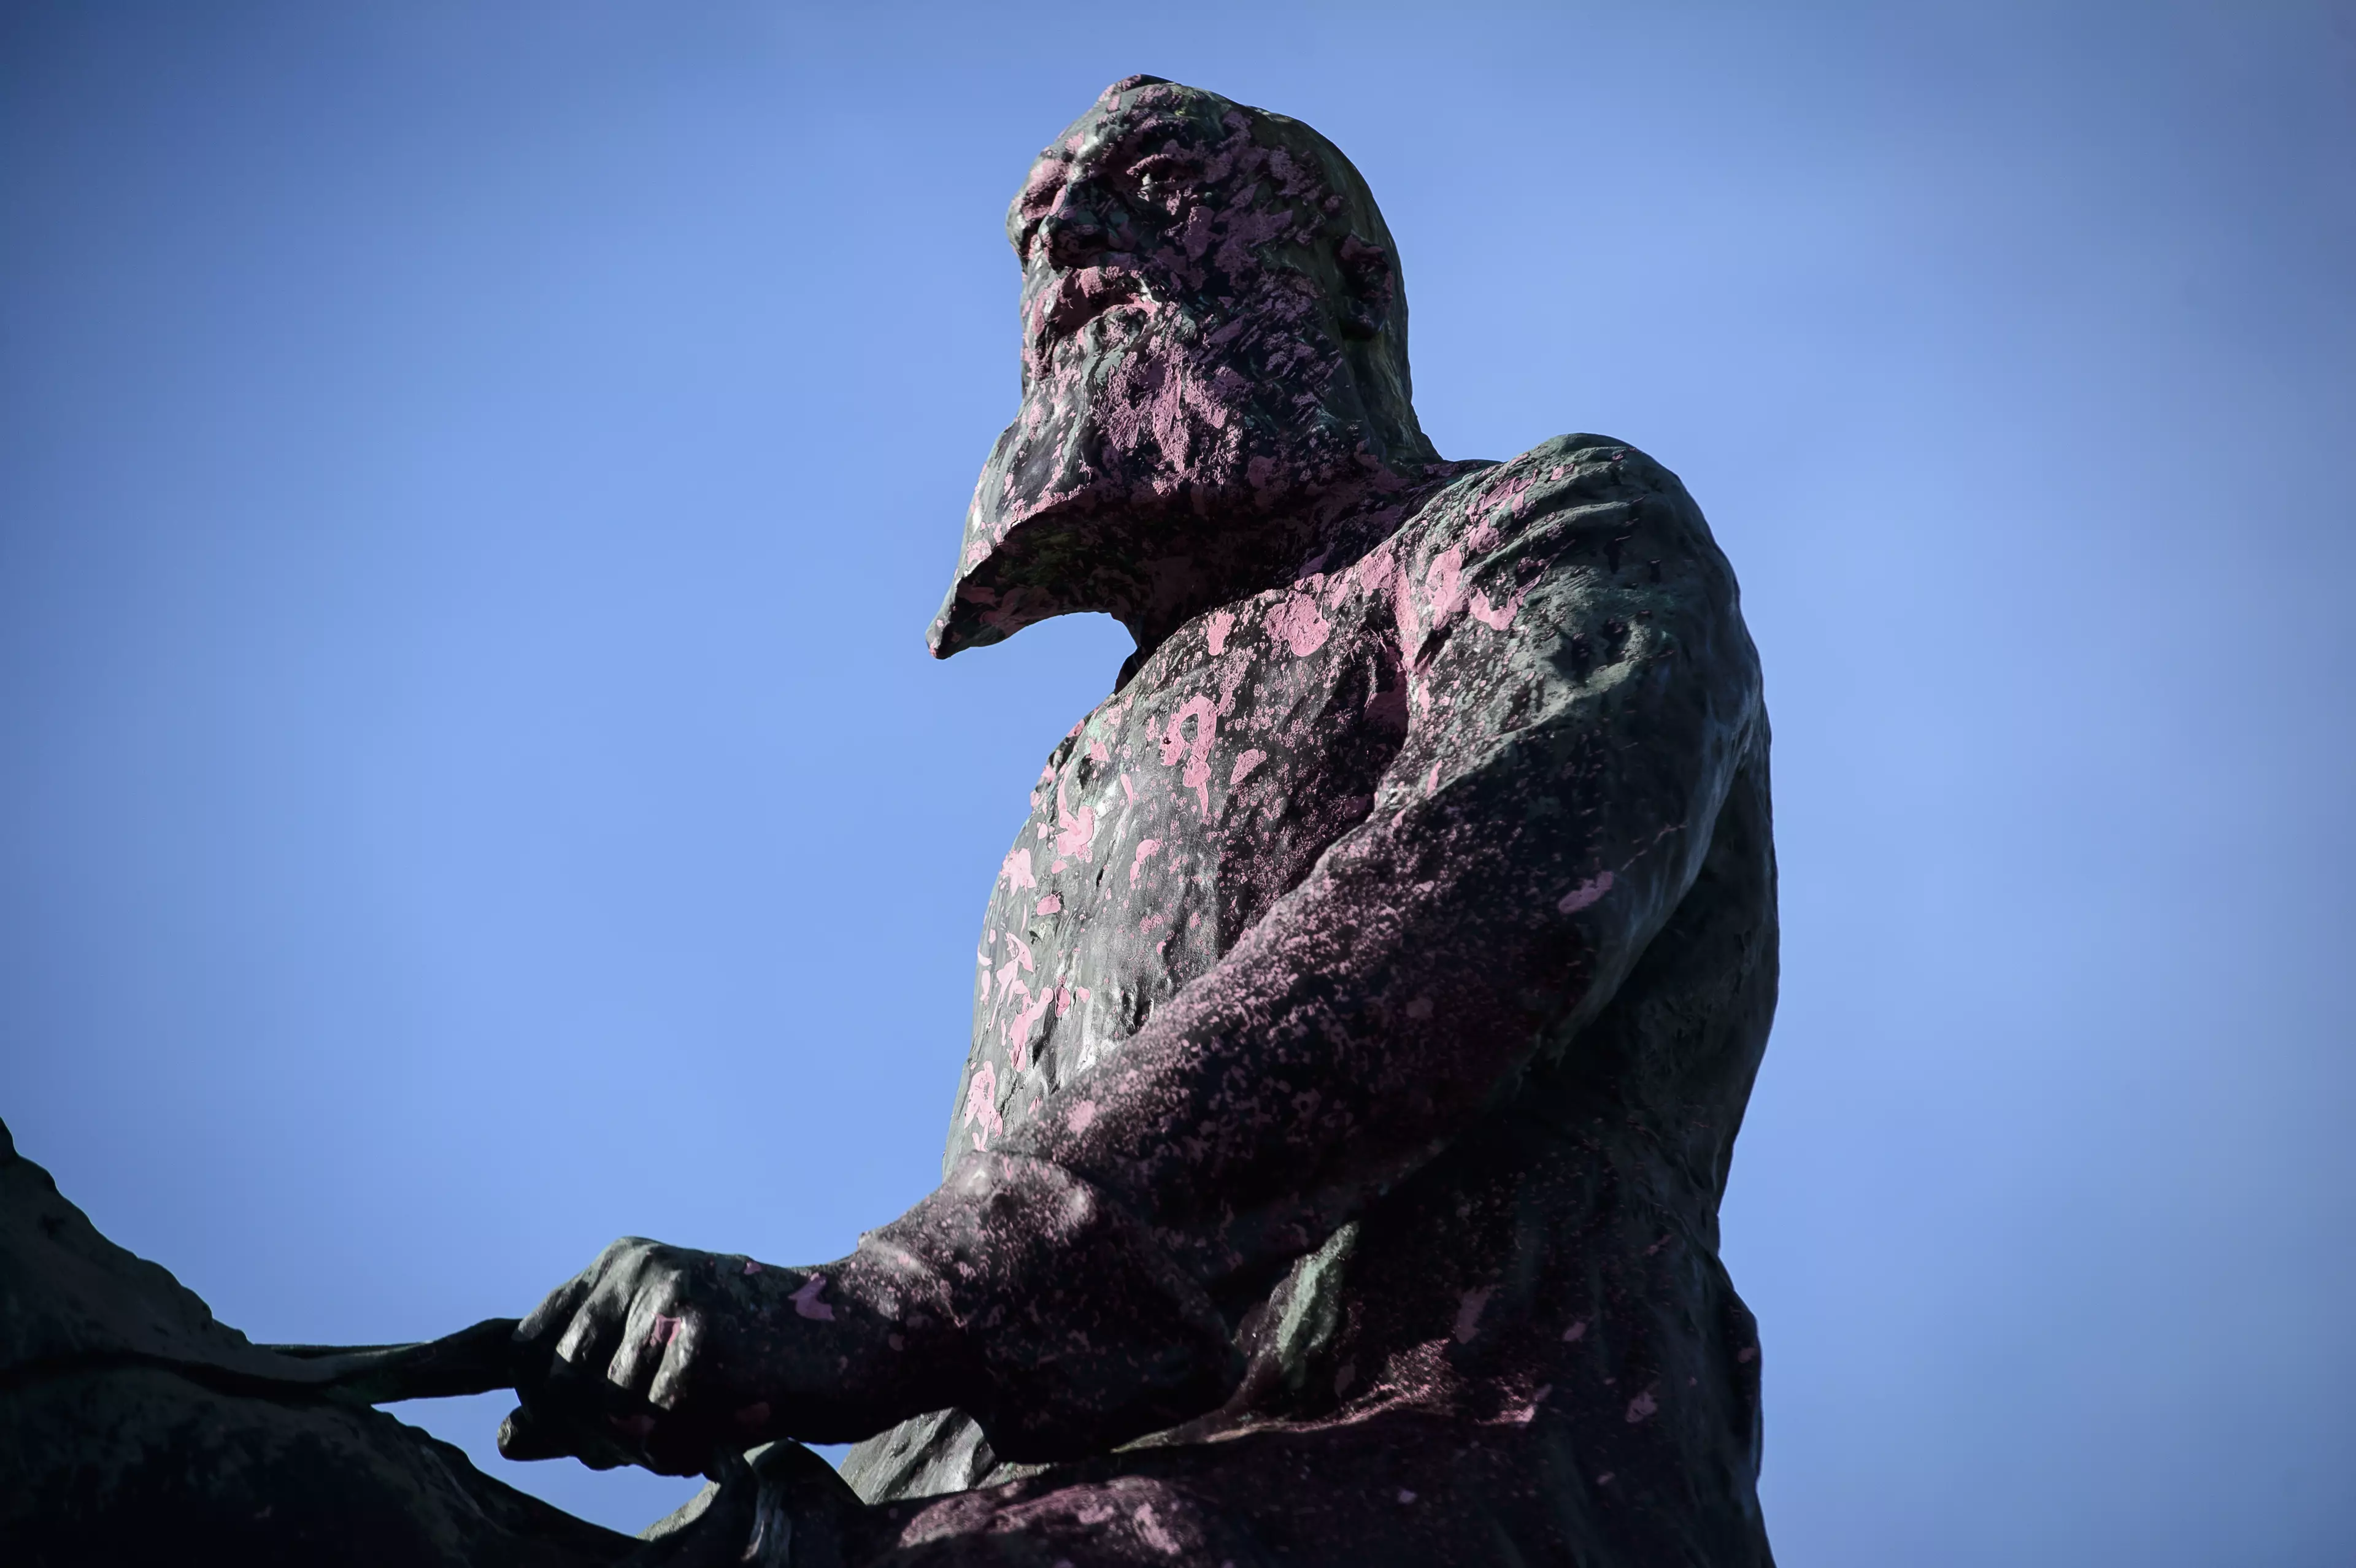 This statue of King Leopold II in Ghent was also splashed with paint.